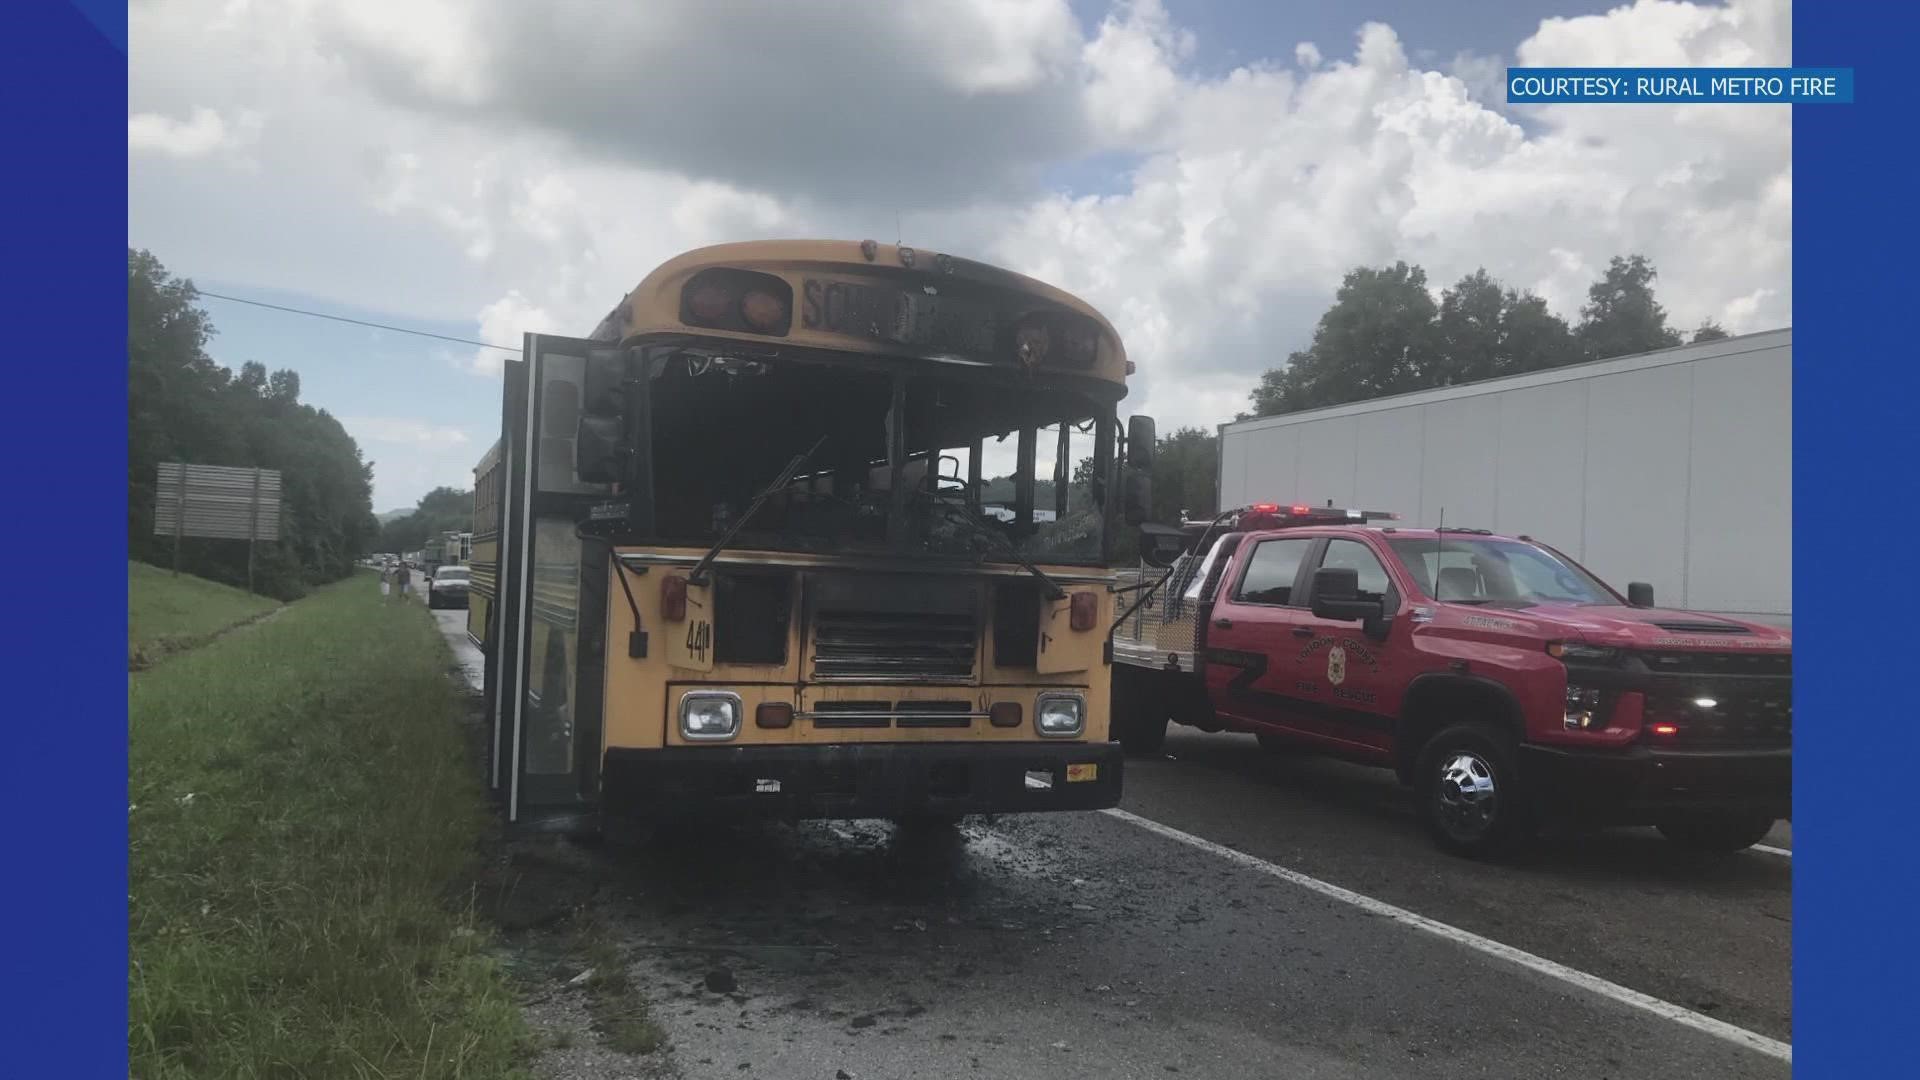 Rural Metro Fire said that around 1:18 p.m. they responded to reports about a school bus on fire near the I-40 and I-75 split, near Watt Road.